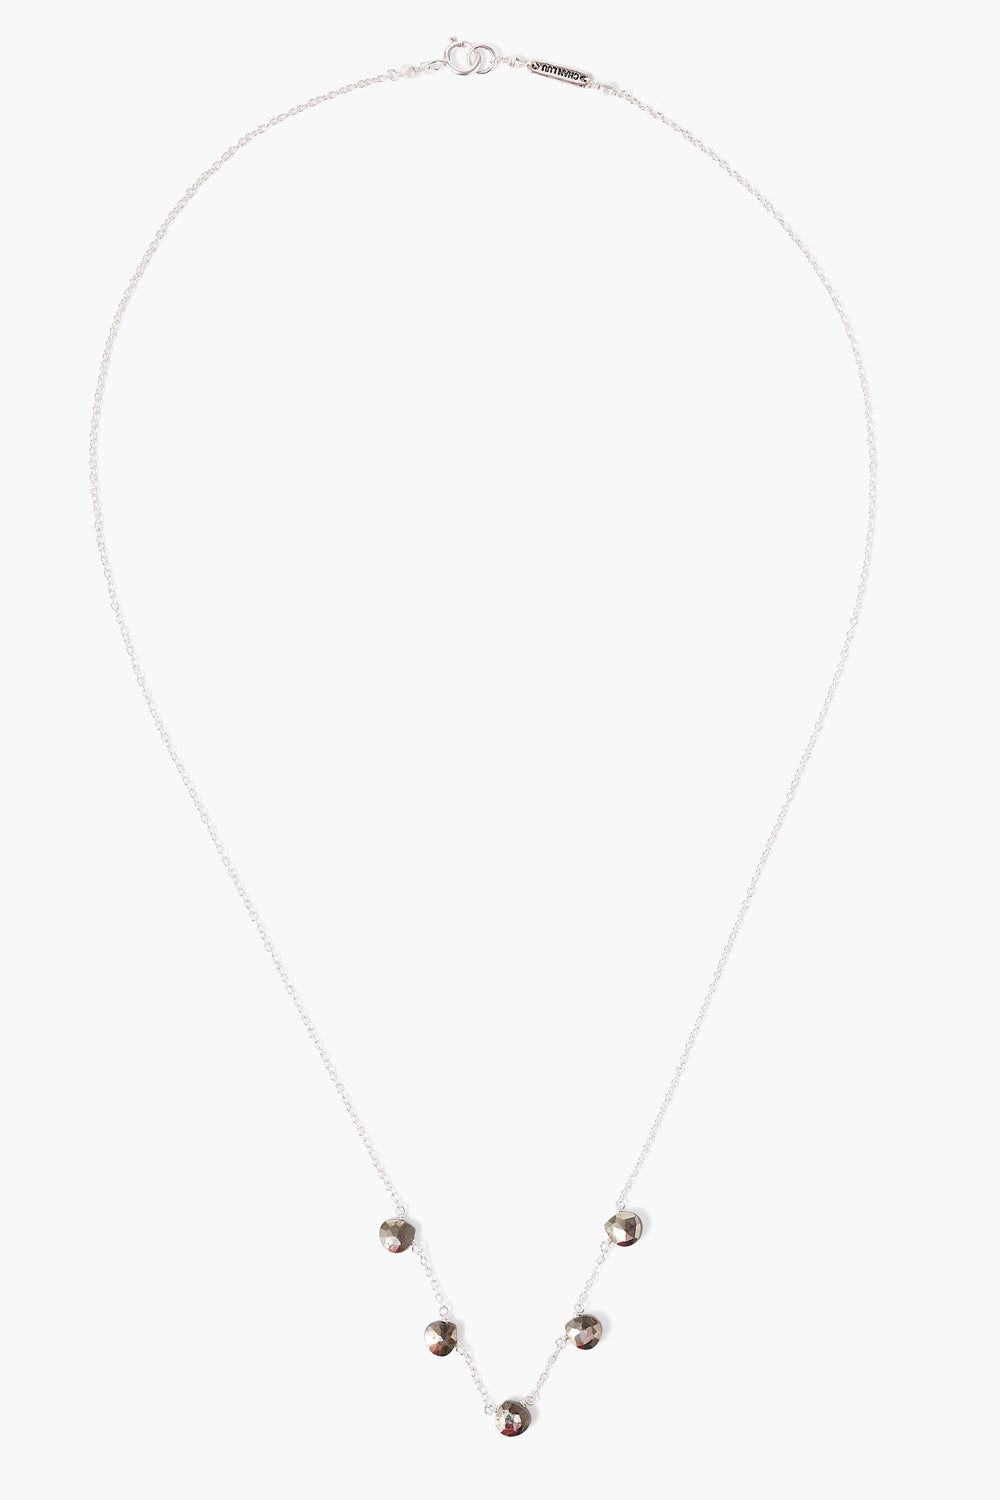 PYRITE 5 STONE NECKLACE - Kingfisher Road - Online Boutique